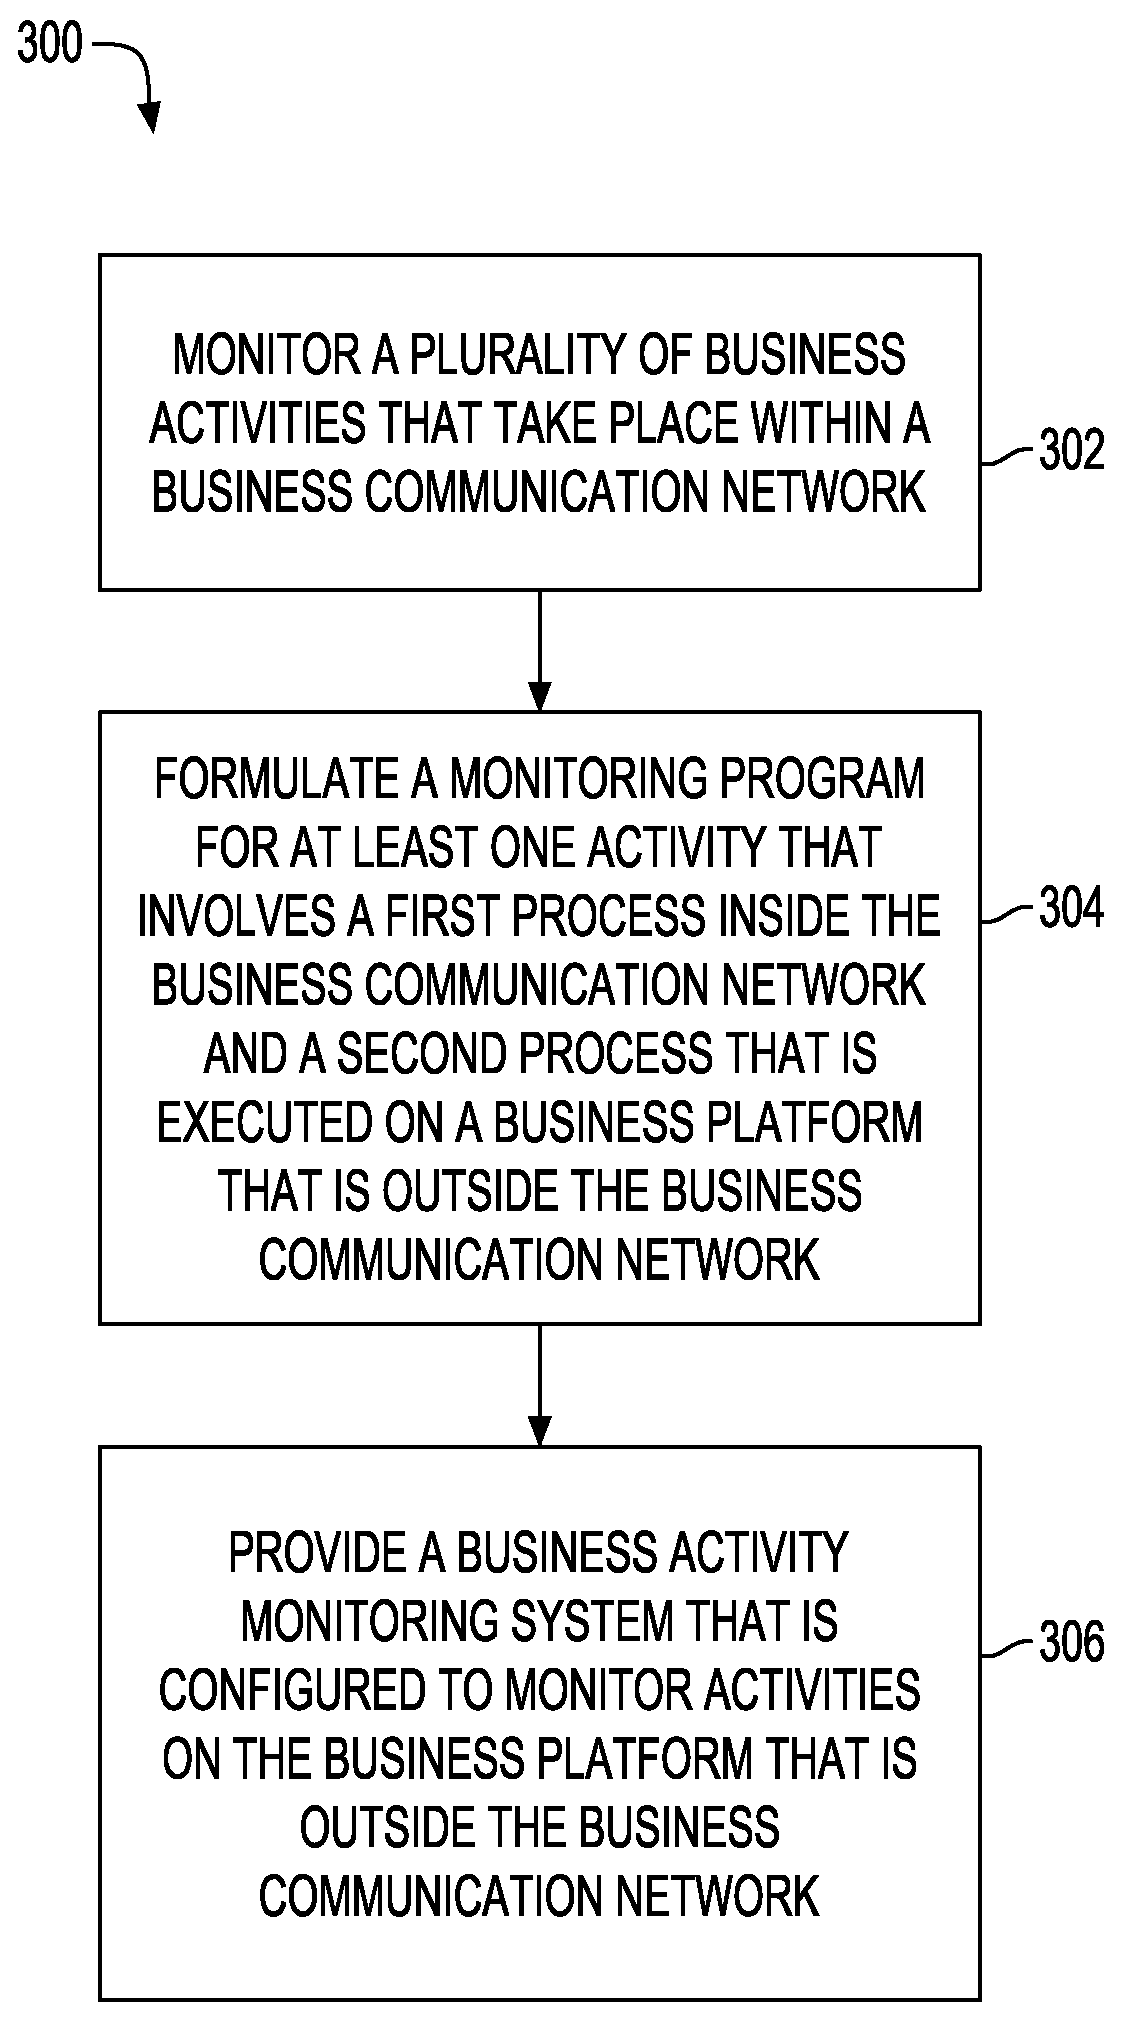 Apparatus and methods for providing business activity monitoring